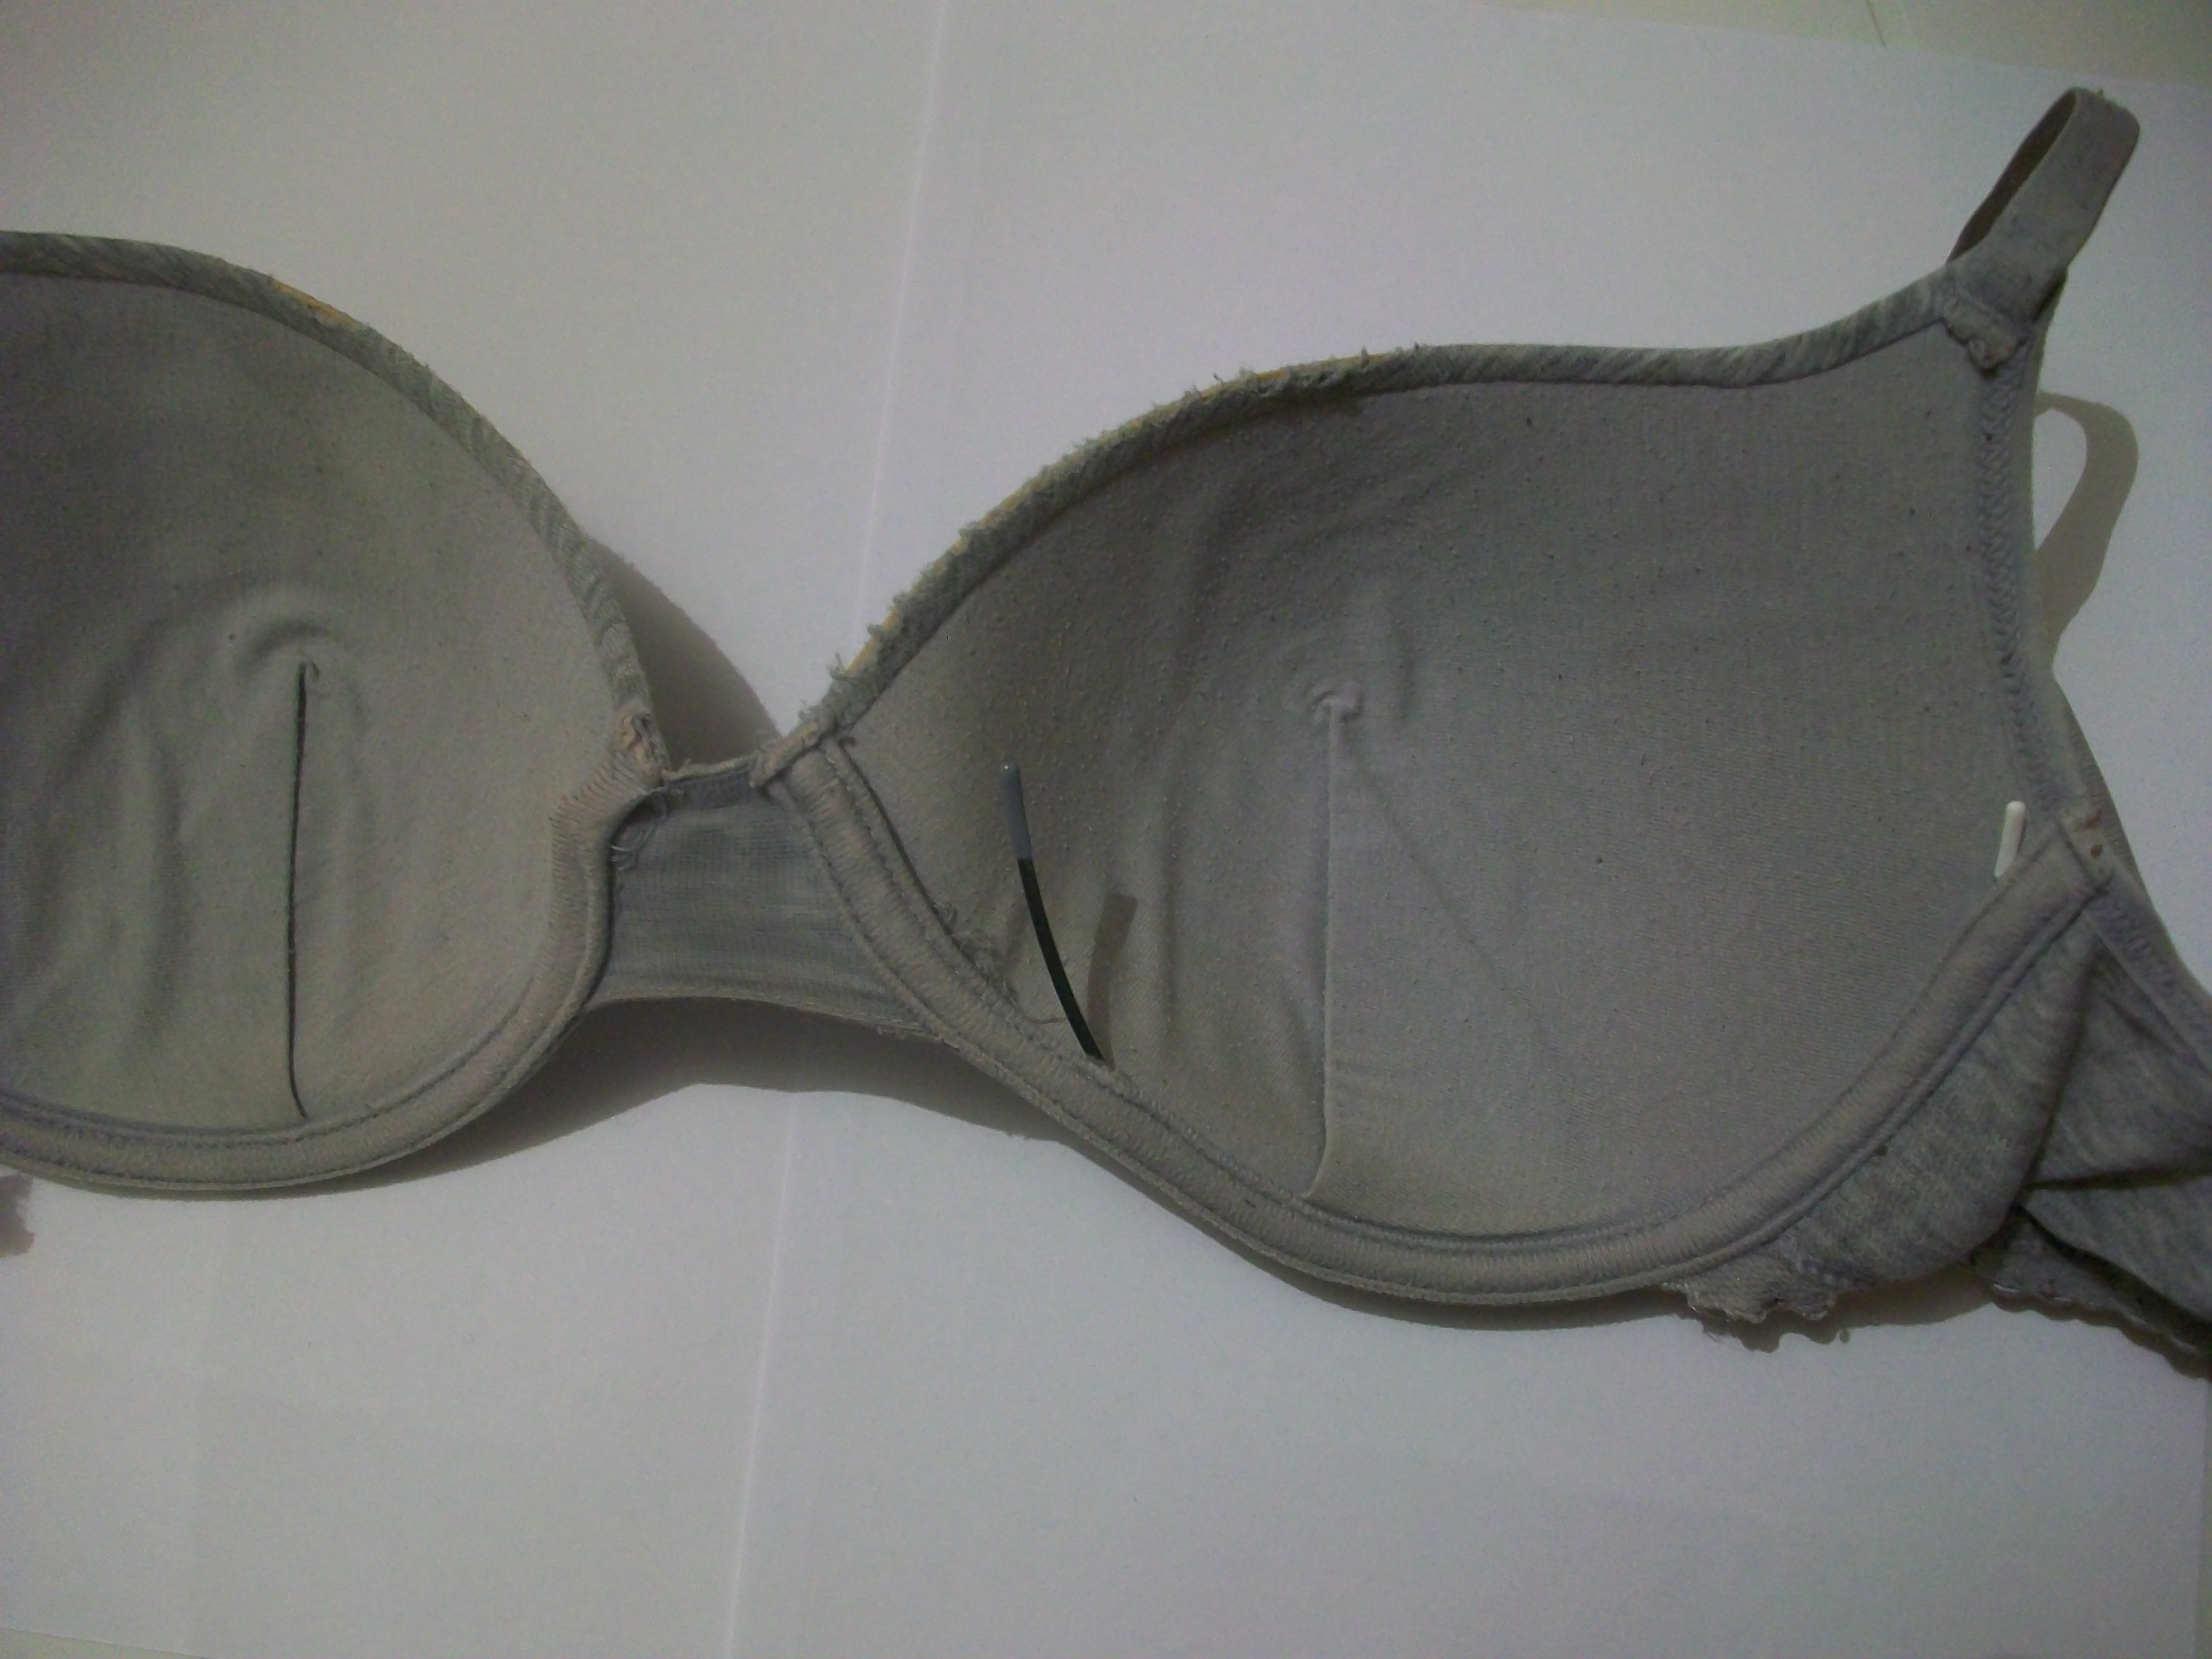 File:Worn bra with protruding metal underwire.jpg - Wikimedia Commons